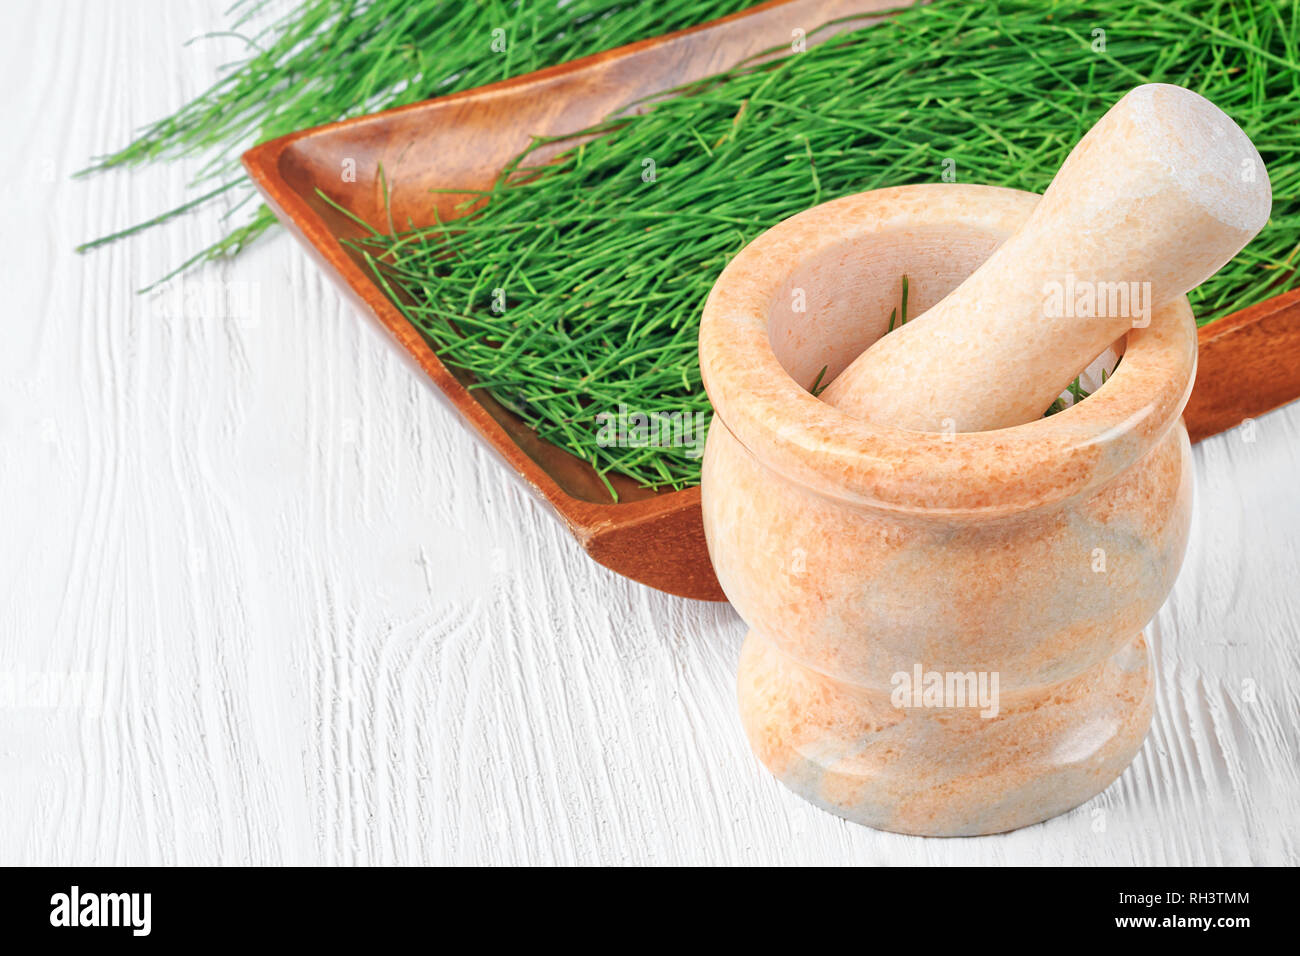 Equisetum (horsetail) herb in mortar. Alternative medicine concept on white wooden table (selective focus). Stock Photo